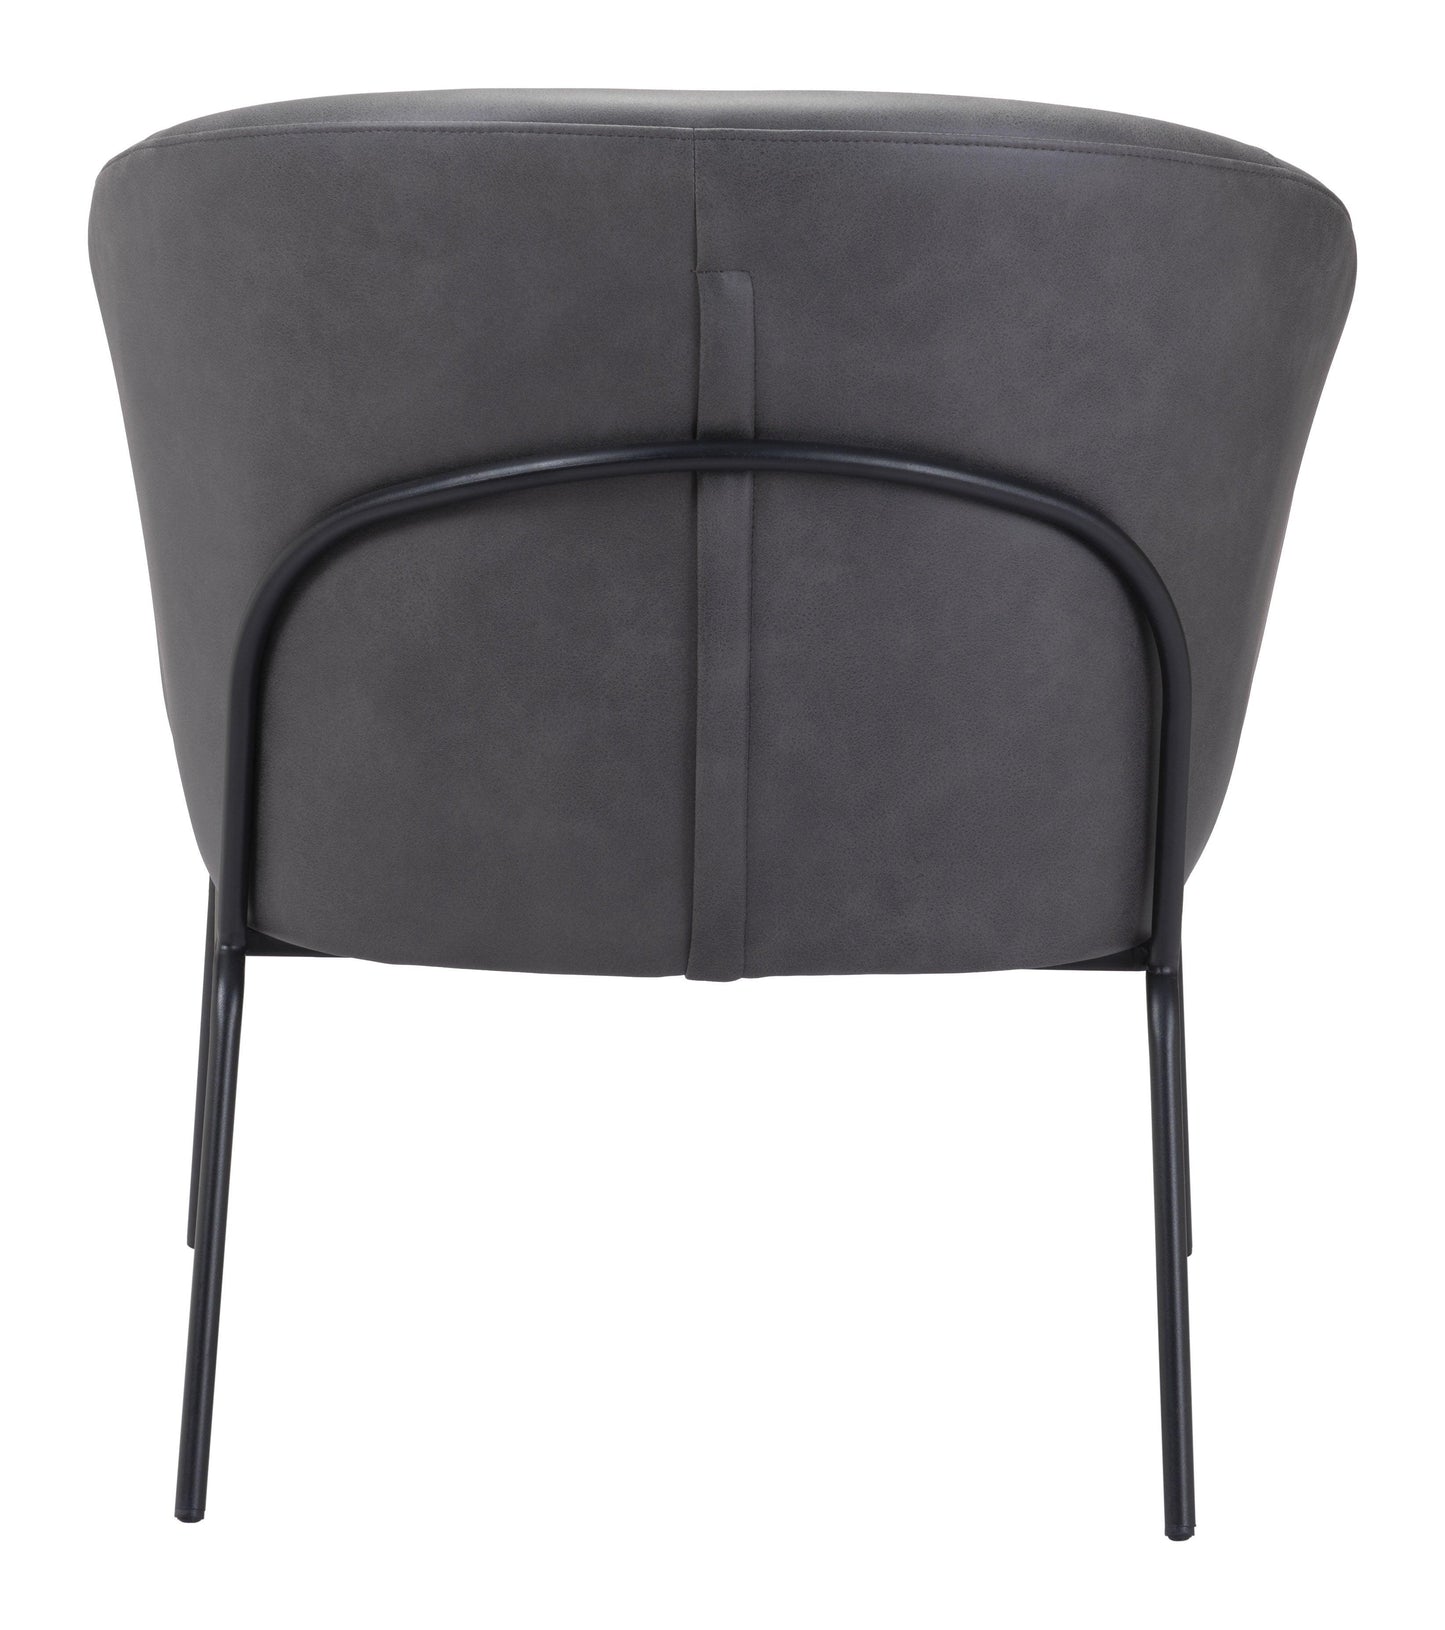 Quinten Accent Chair Vintage Gray - Sideboards and Things Accents_Gold, Brand_Zuo Modern, Color_Gold, Color_Gray, Finish_Powder Coated, Materials_Metal, Materials_Wood, Metal Type_Steel, Product Type_Occasional Chair, Upholstery Type_Fabric Blend, Upholstery Type_Polyester, Wood Species_Plywood